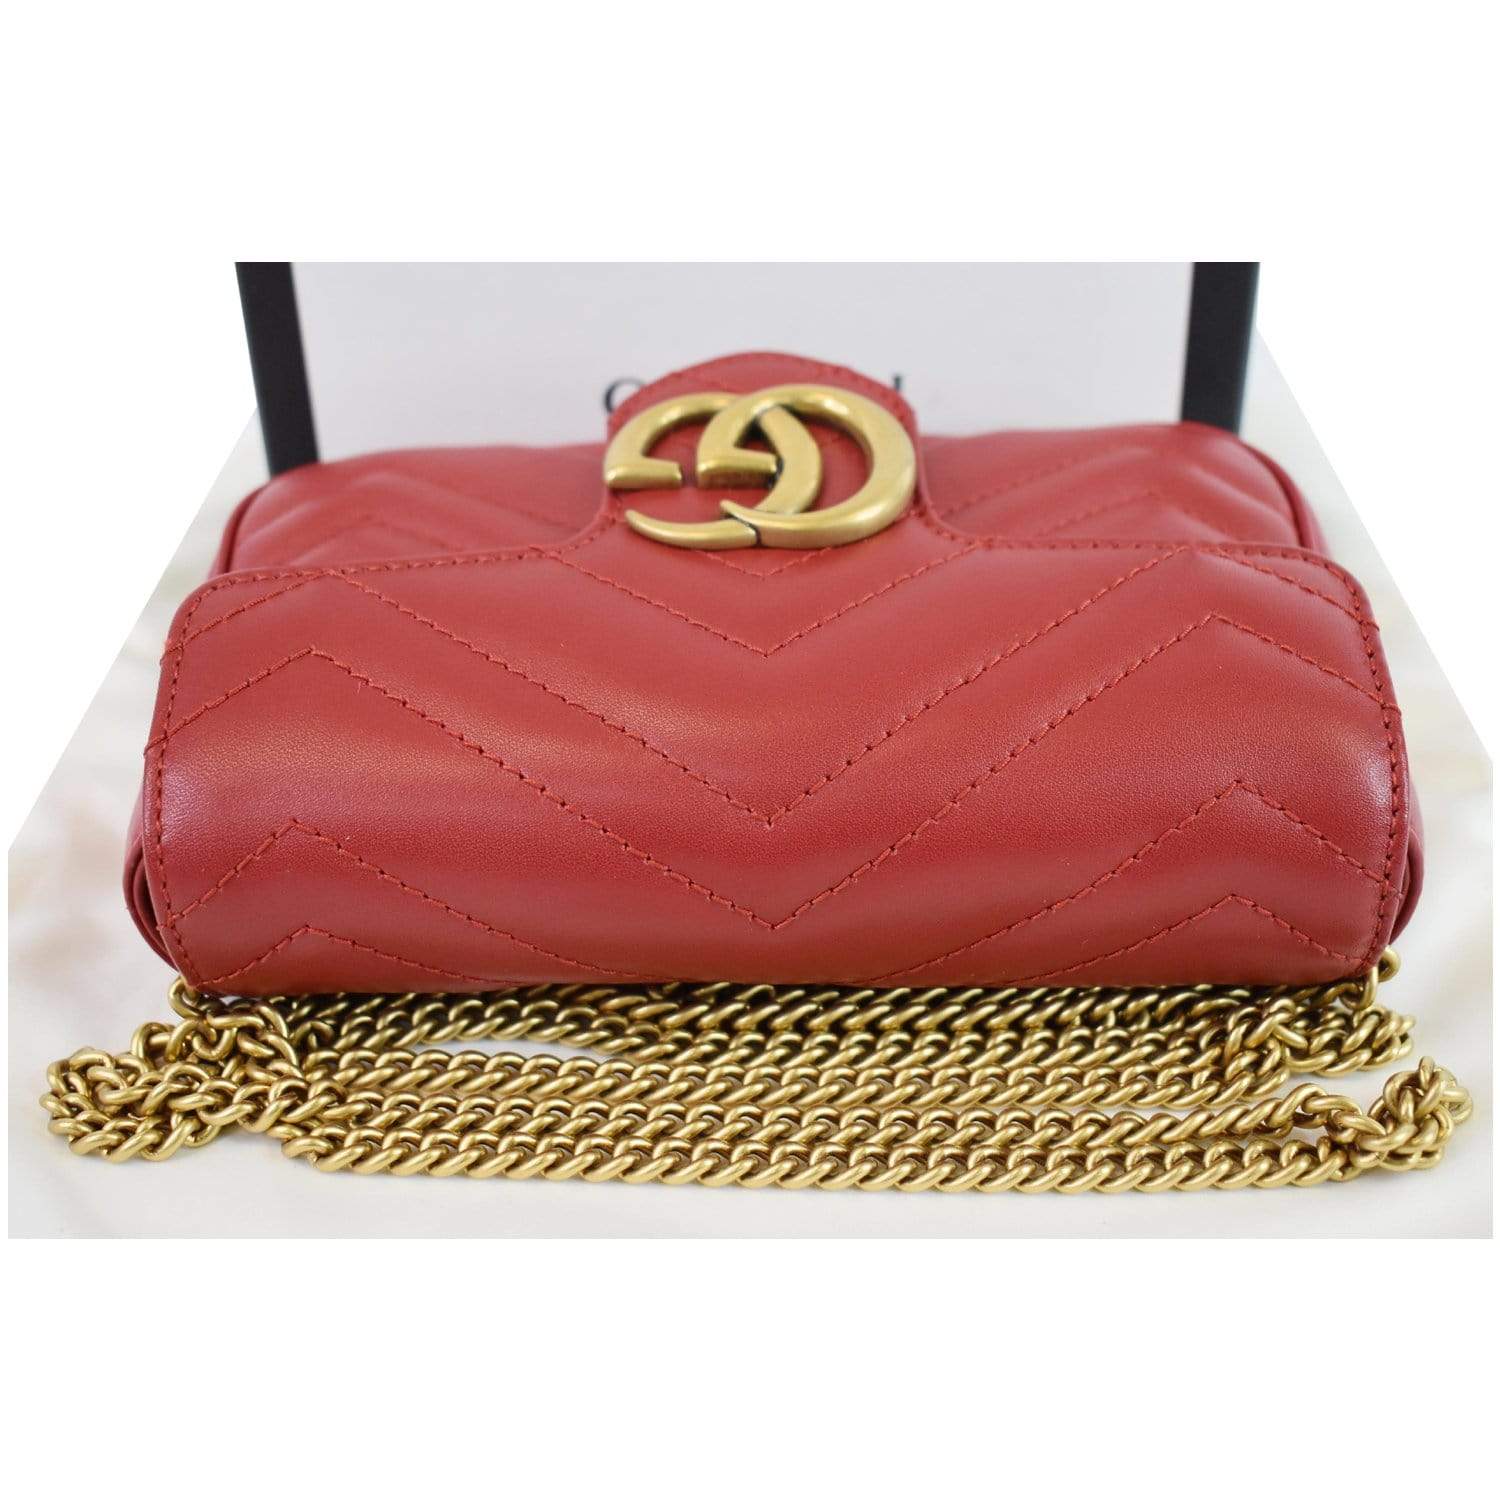 Gucci, Bags, Gucci Marmont Super Mini Quilted Leather Bag